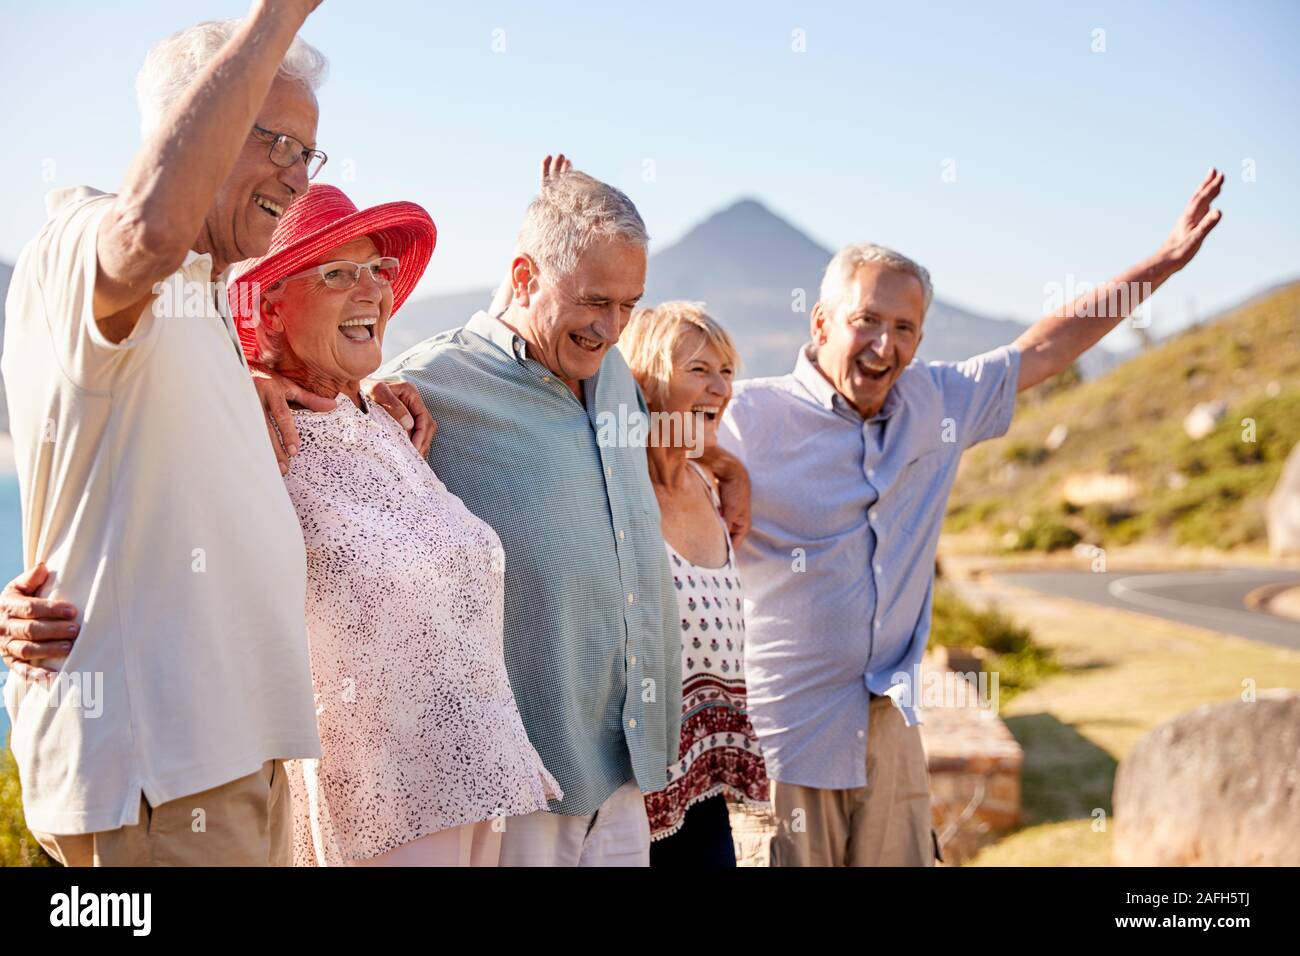 Senior Friends Visiting Tourist Landmark On Group Vacation With Arms Raised Stock Photo